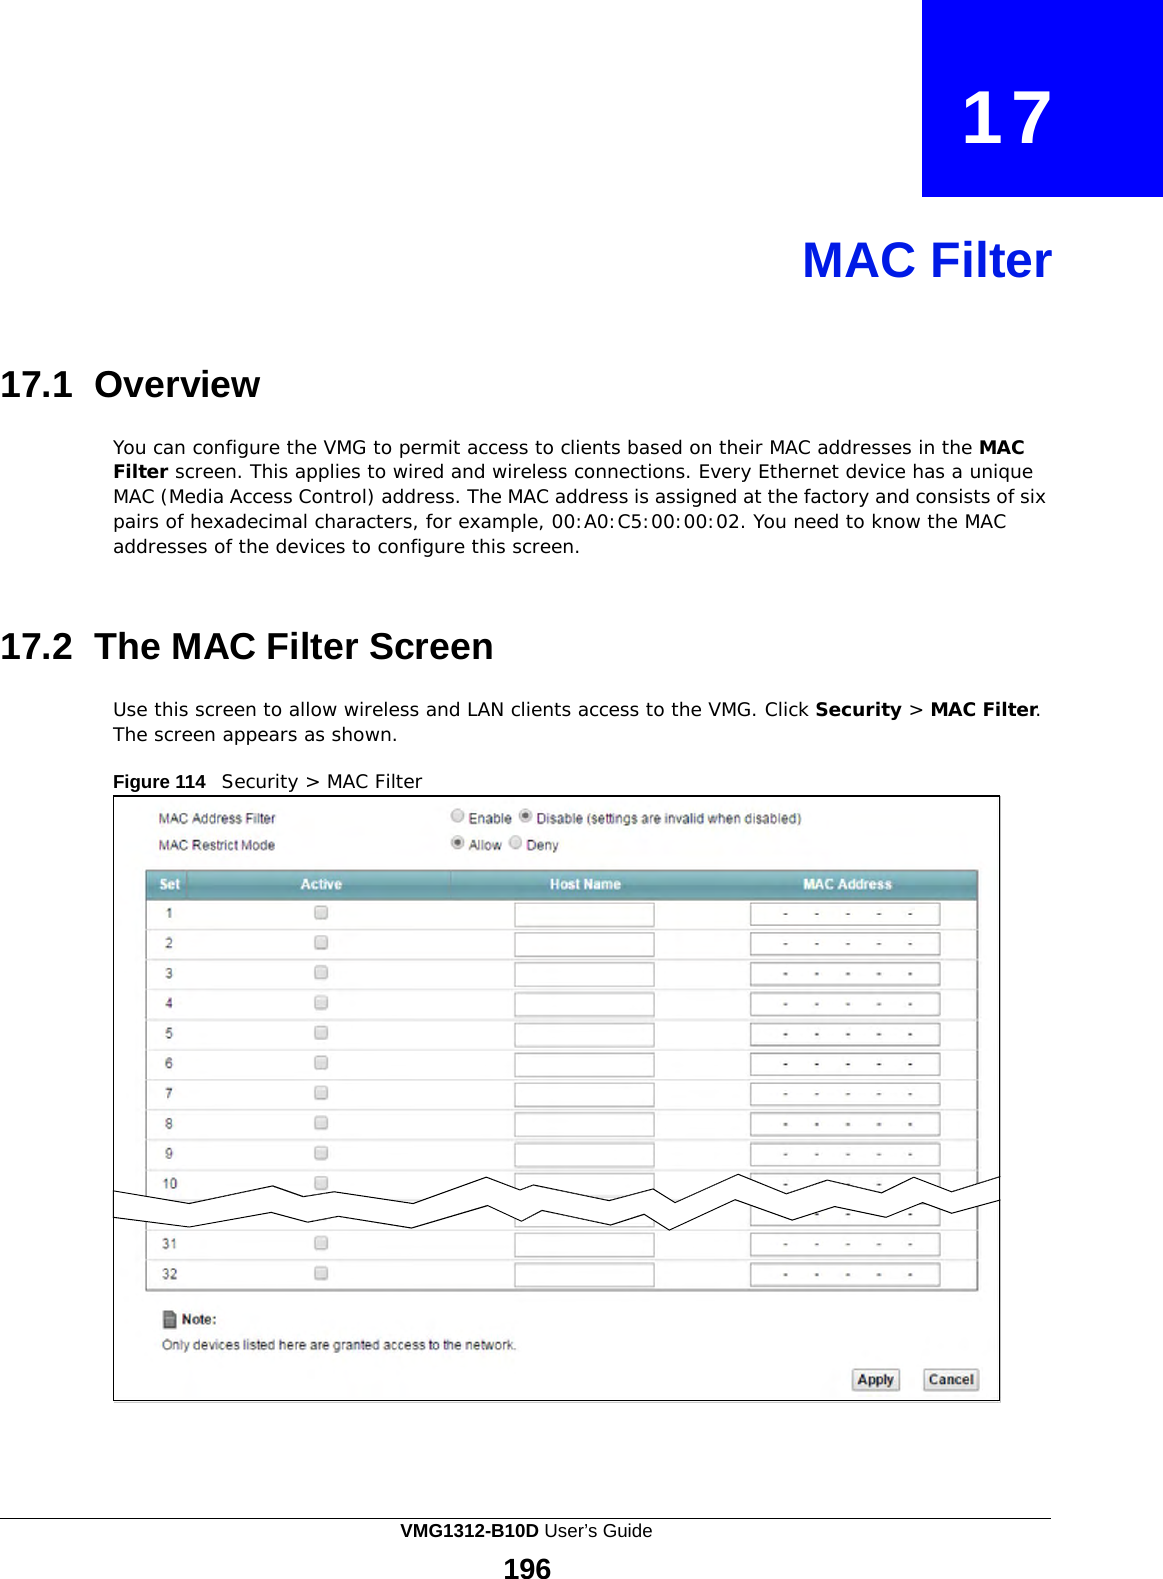    17     MAC Filter     17.1 Overview  You can configure the VMG to permit access to clients based on their MAC addresses in the MAC Filter screen. This applies to wired and wireless connections. Every Ethernet device has a unique MAC (Media Access Control) address. The MAC address is assigned at the factory and consists of six pairs of hexadecimal characters, for example, 00:A0:C5:00:00:02. You need to know the MAC addresses of the devices to configure this screen.    17.2 The MAC Filter Screen  Use this screen to allow wireless and LAN clients access to the VMG. Click Security &gt; MAC Filter. The screen appears as shown.  Figure 114   Security &gt; MAC Filter VMG1312-B10D User’s Guide 196  